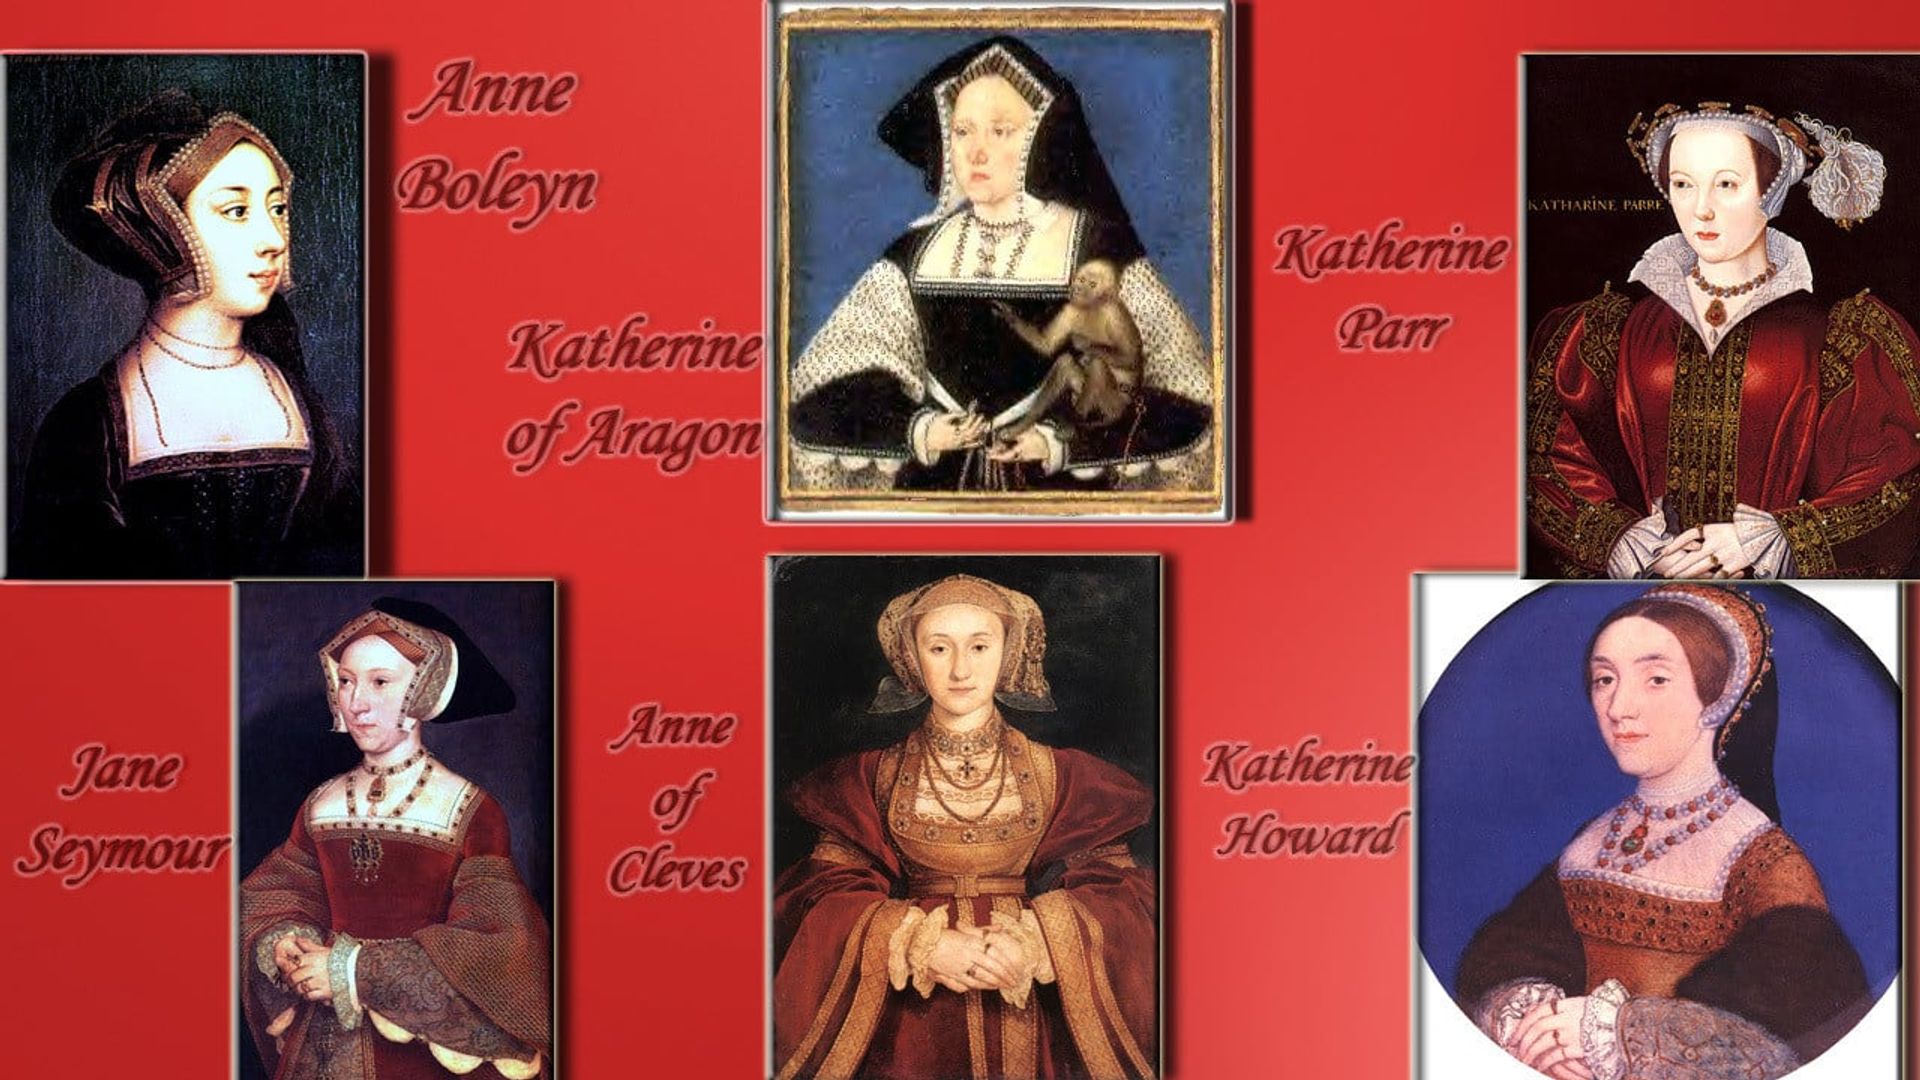 The Six Wives of Henry VIII background